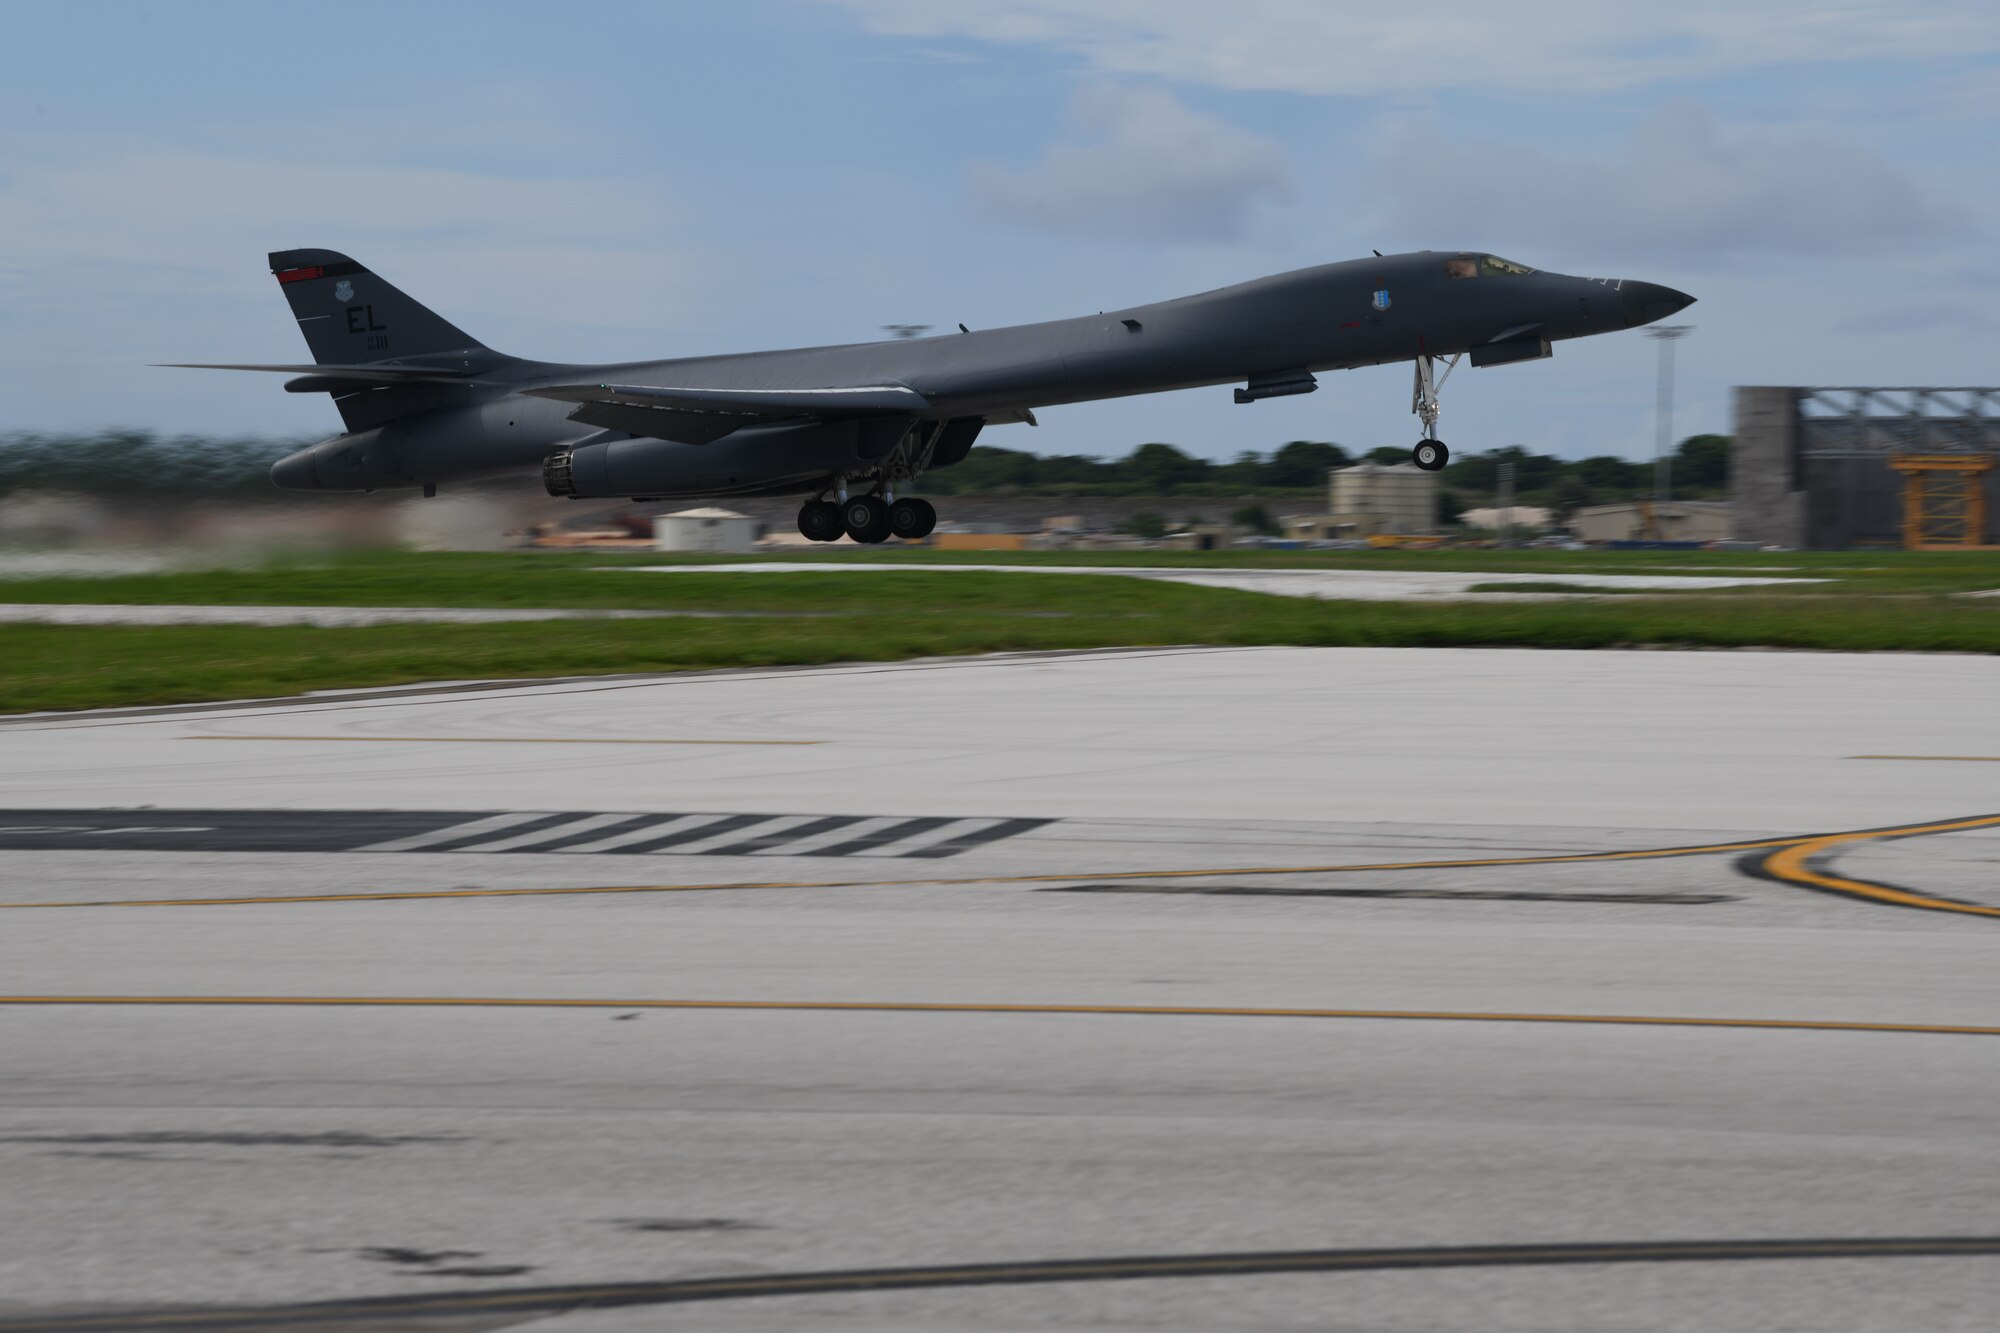 A B-1B Lancer assigned to the 28th Bomb Wing, Ellsworth Air Force Base, S.D., takes off for Exercise Valiant Shield at Andersen AFB, Guam, Sept. 18, 2020. Valiant Shield allows the U.S. Joint Force to more fully develop Joint All-Domain Operations concepts through exercises and experimentation for application in the Indo-Pacific Area of responsibility. (U.S. Air Force photo by Staff Sgt. Nicolas Z. Erwin)